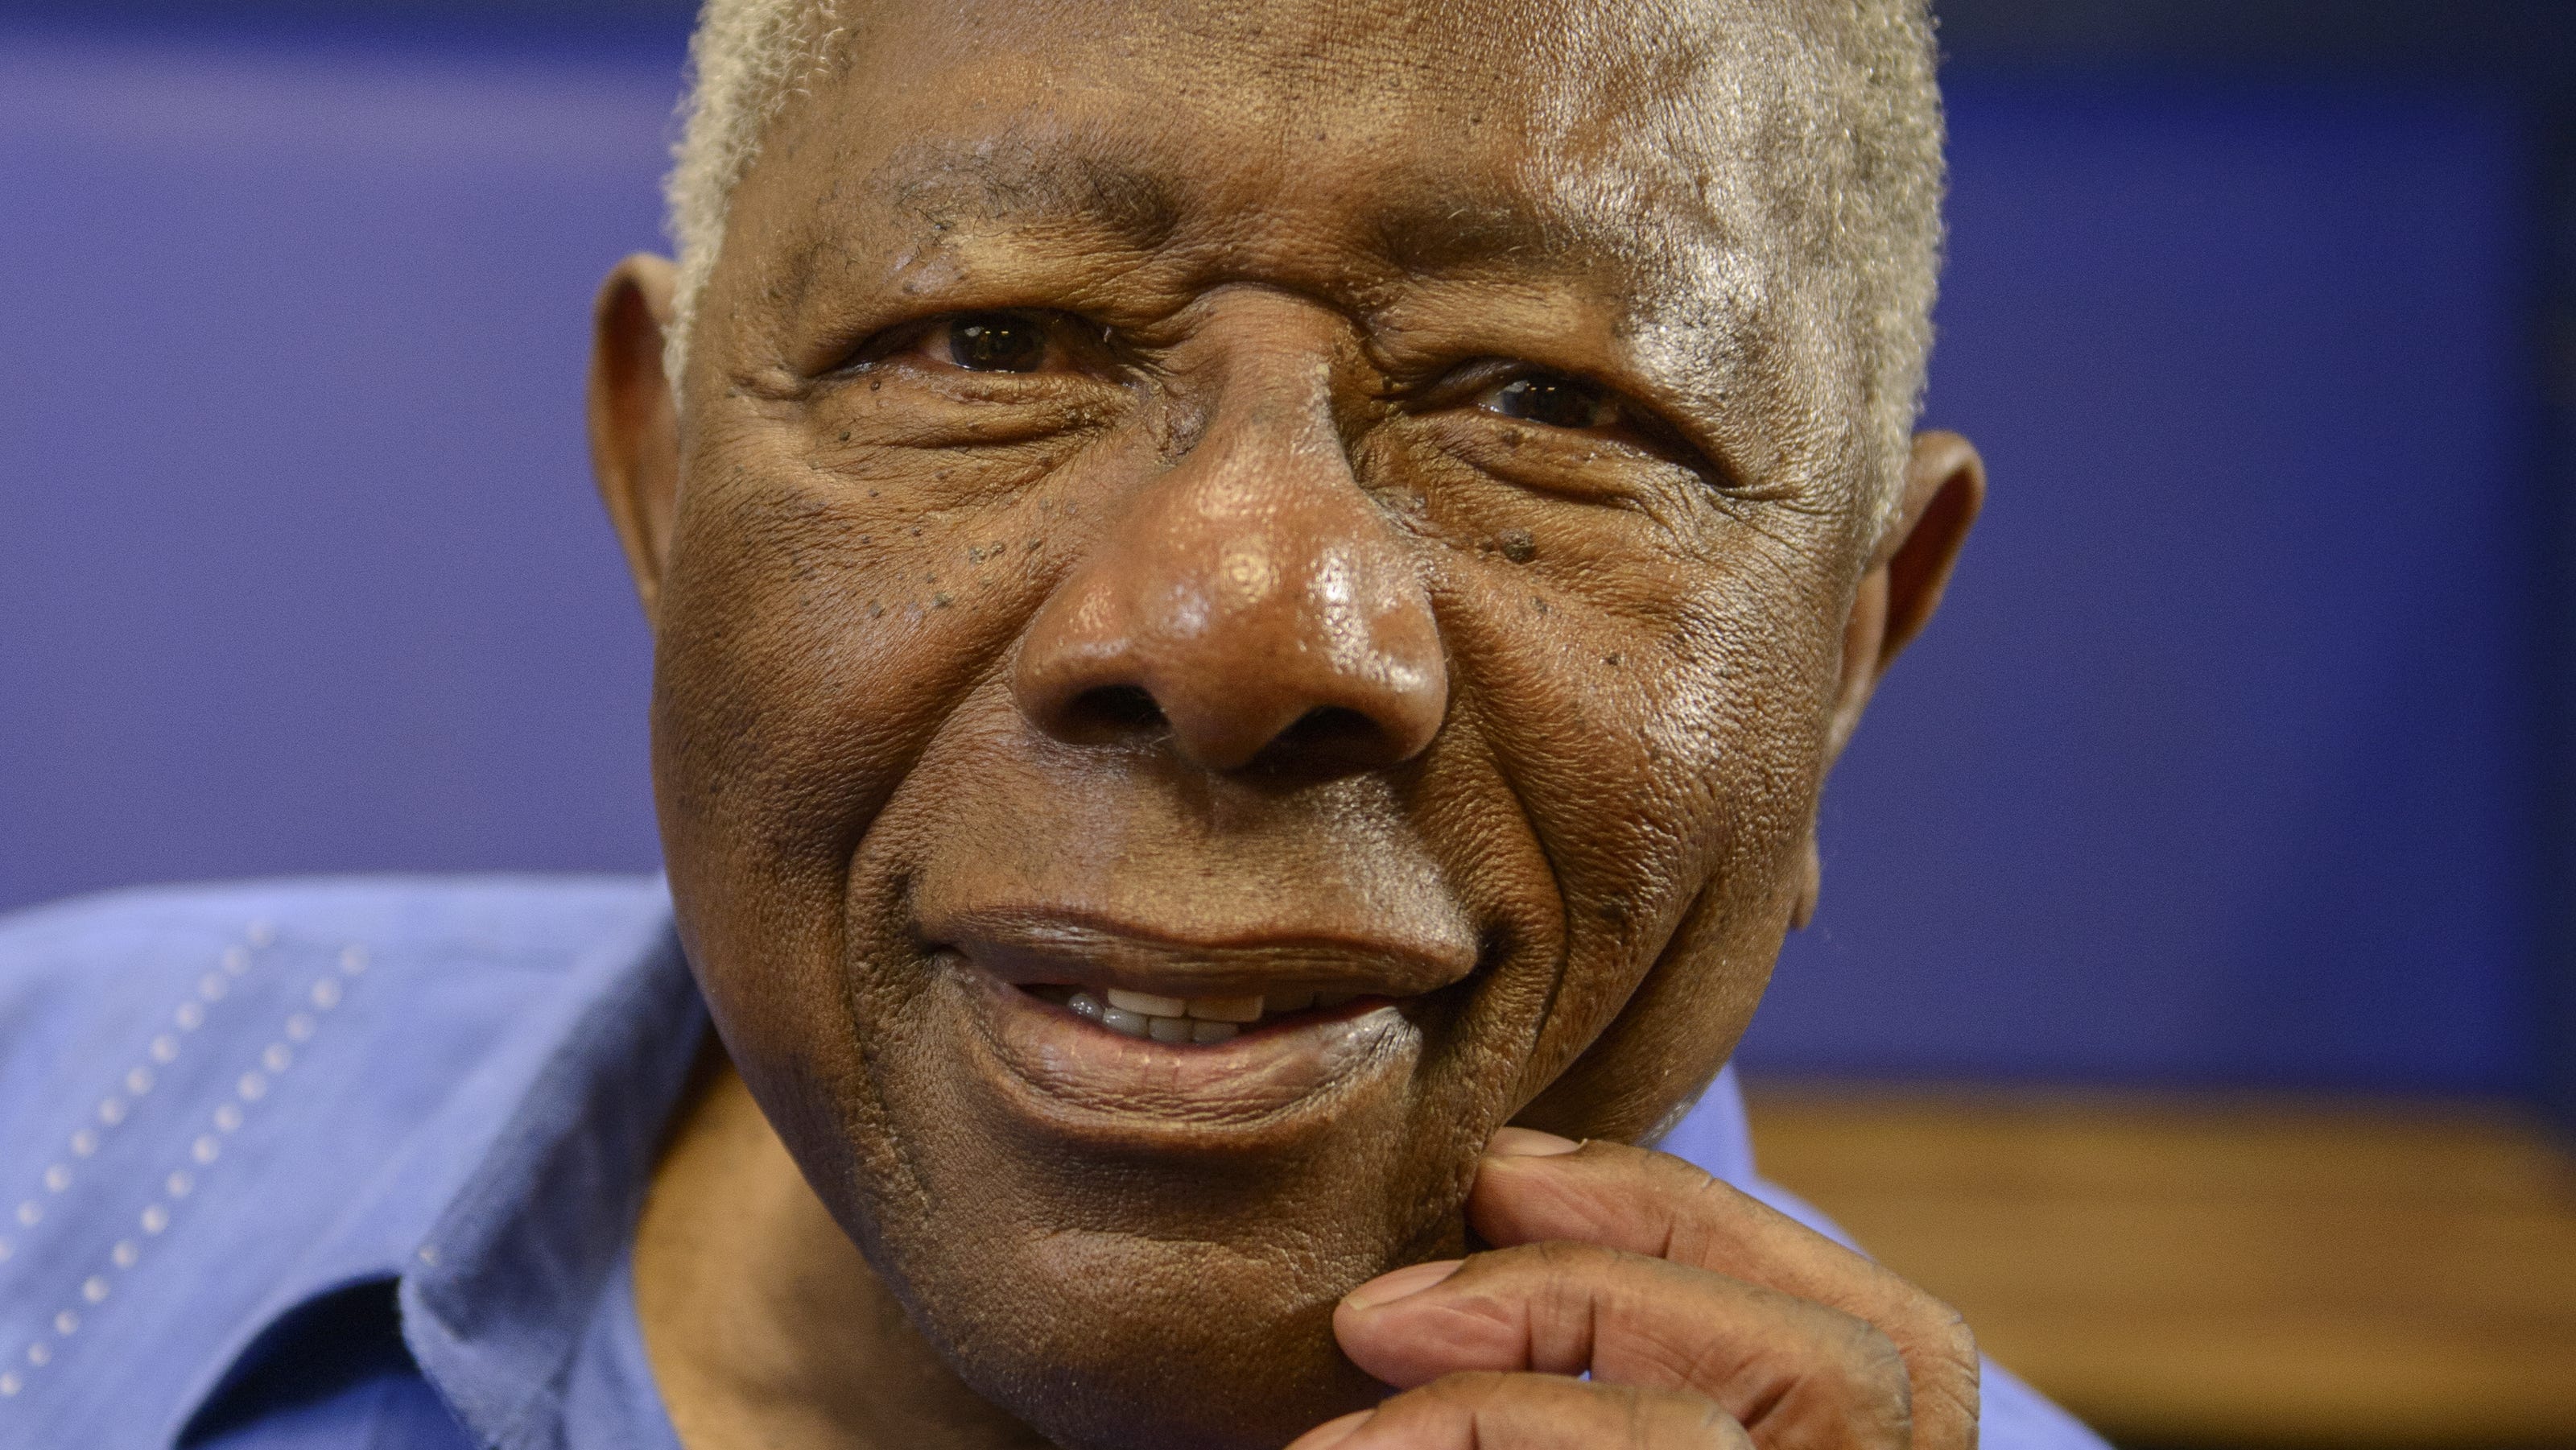 Opinion: Hank Aaron left his mark on America just as he did on baseball's record books